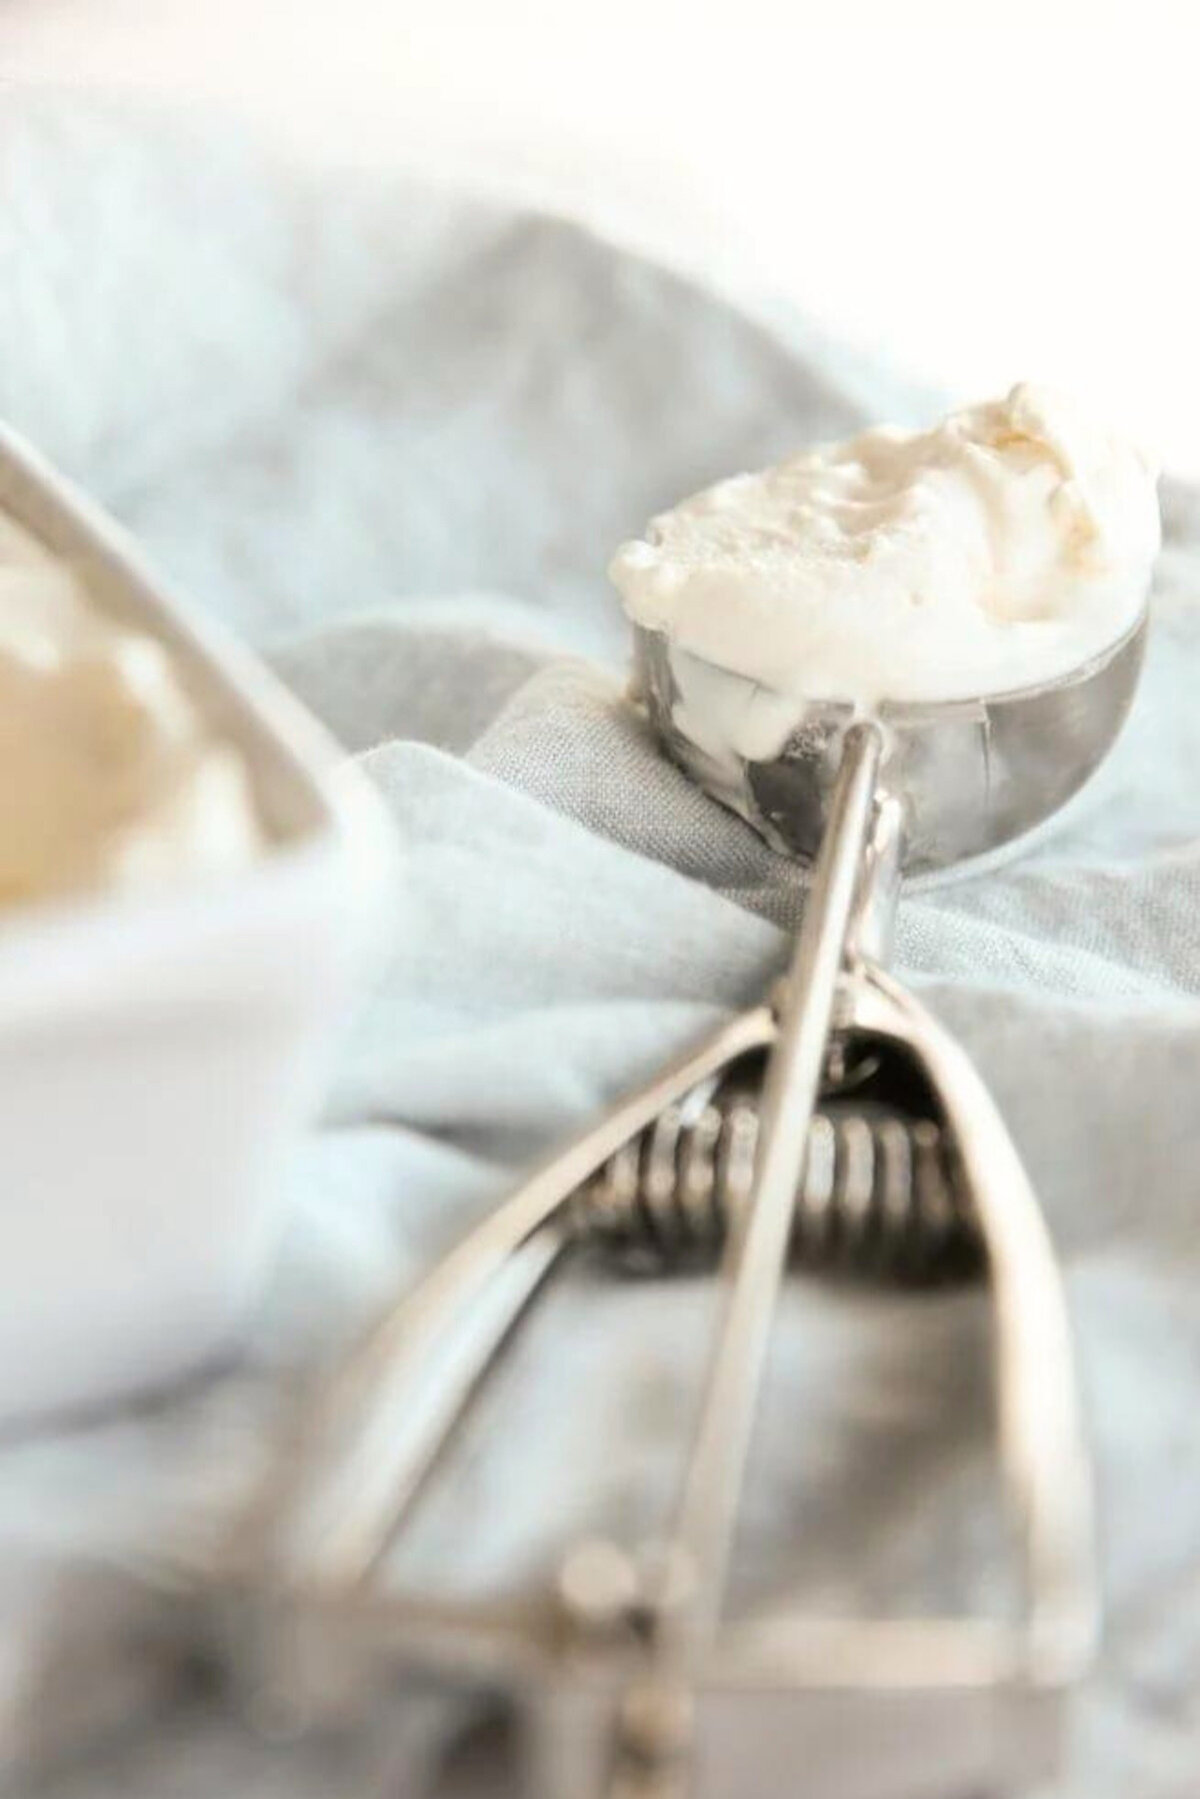 Homemade vanilla ice cream in a bowl with a spoon.